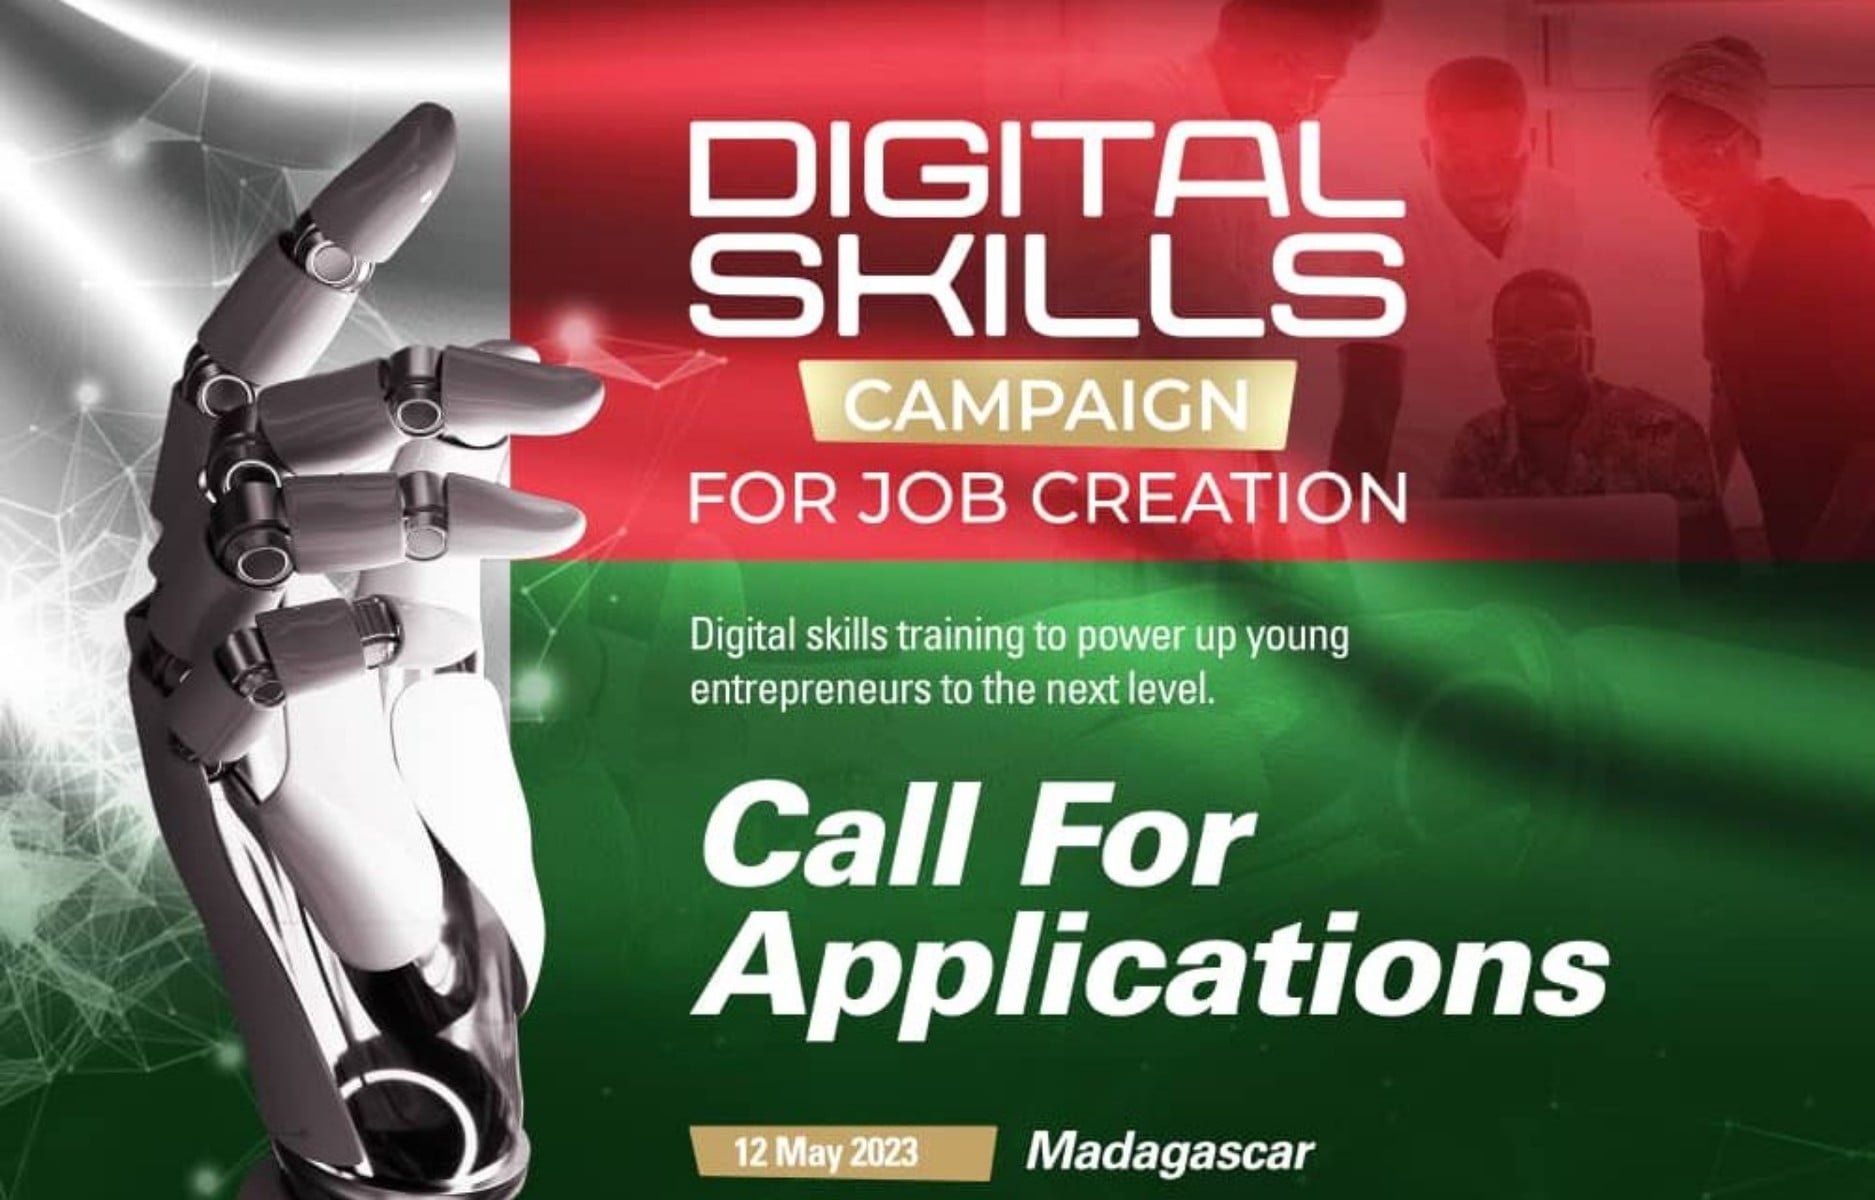 Google Africa/African Youth Envoy Digital Skills Campaign 2023 for youth-led SMEs